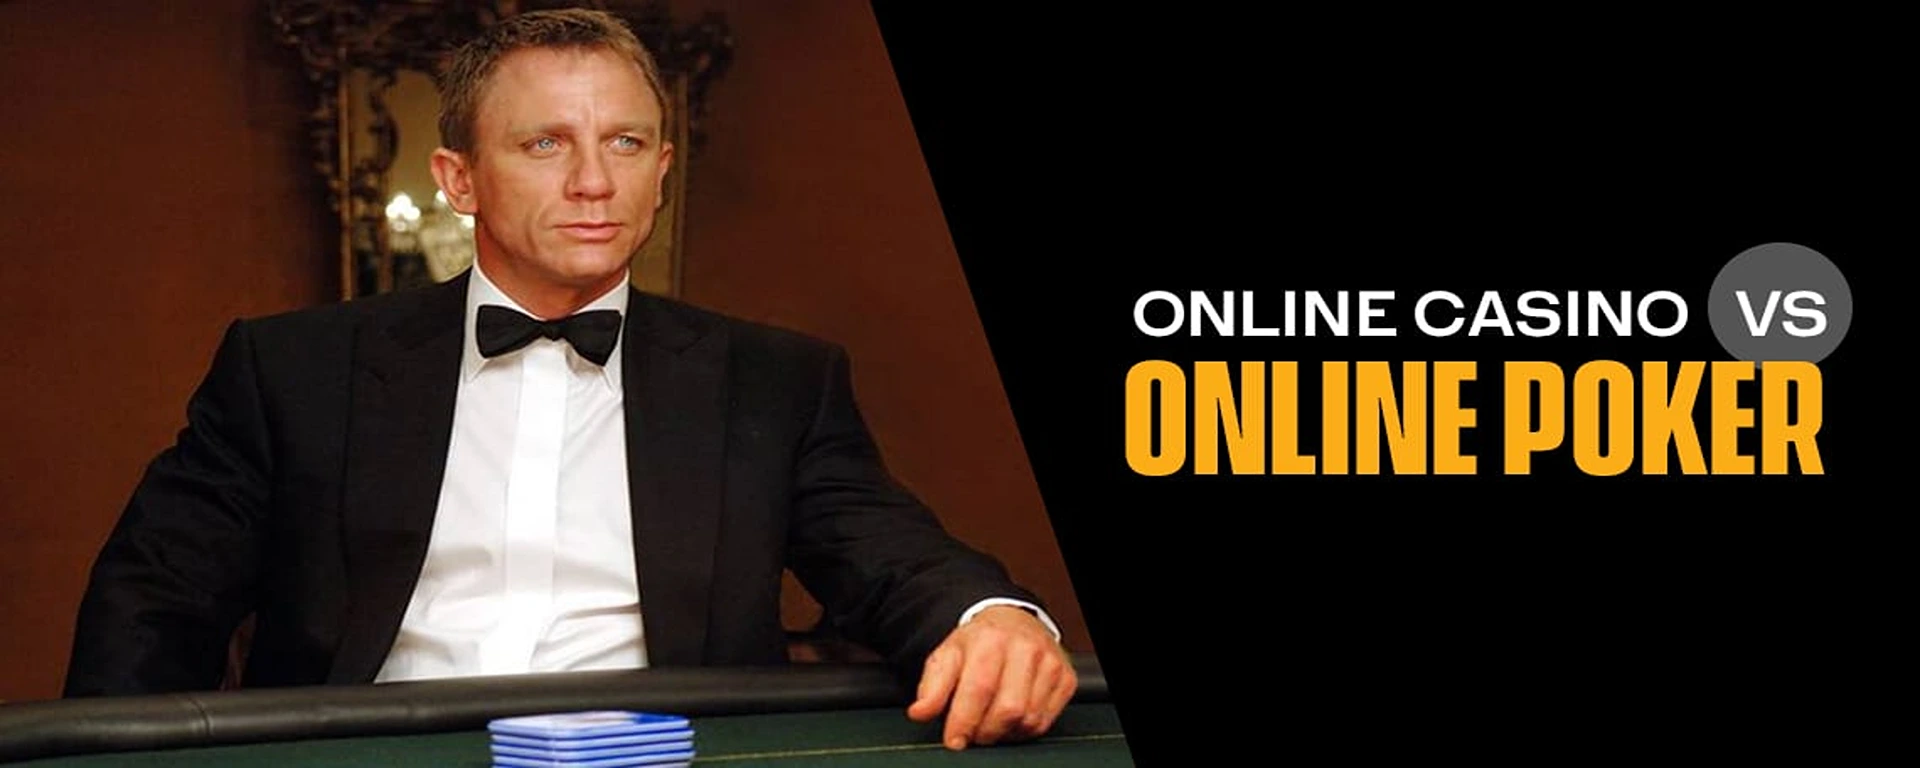 Online Casino Vs Online Poker: Differences and What To Choose?